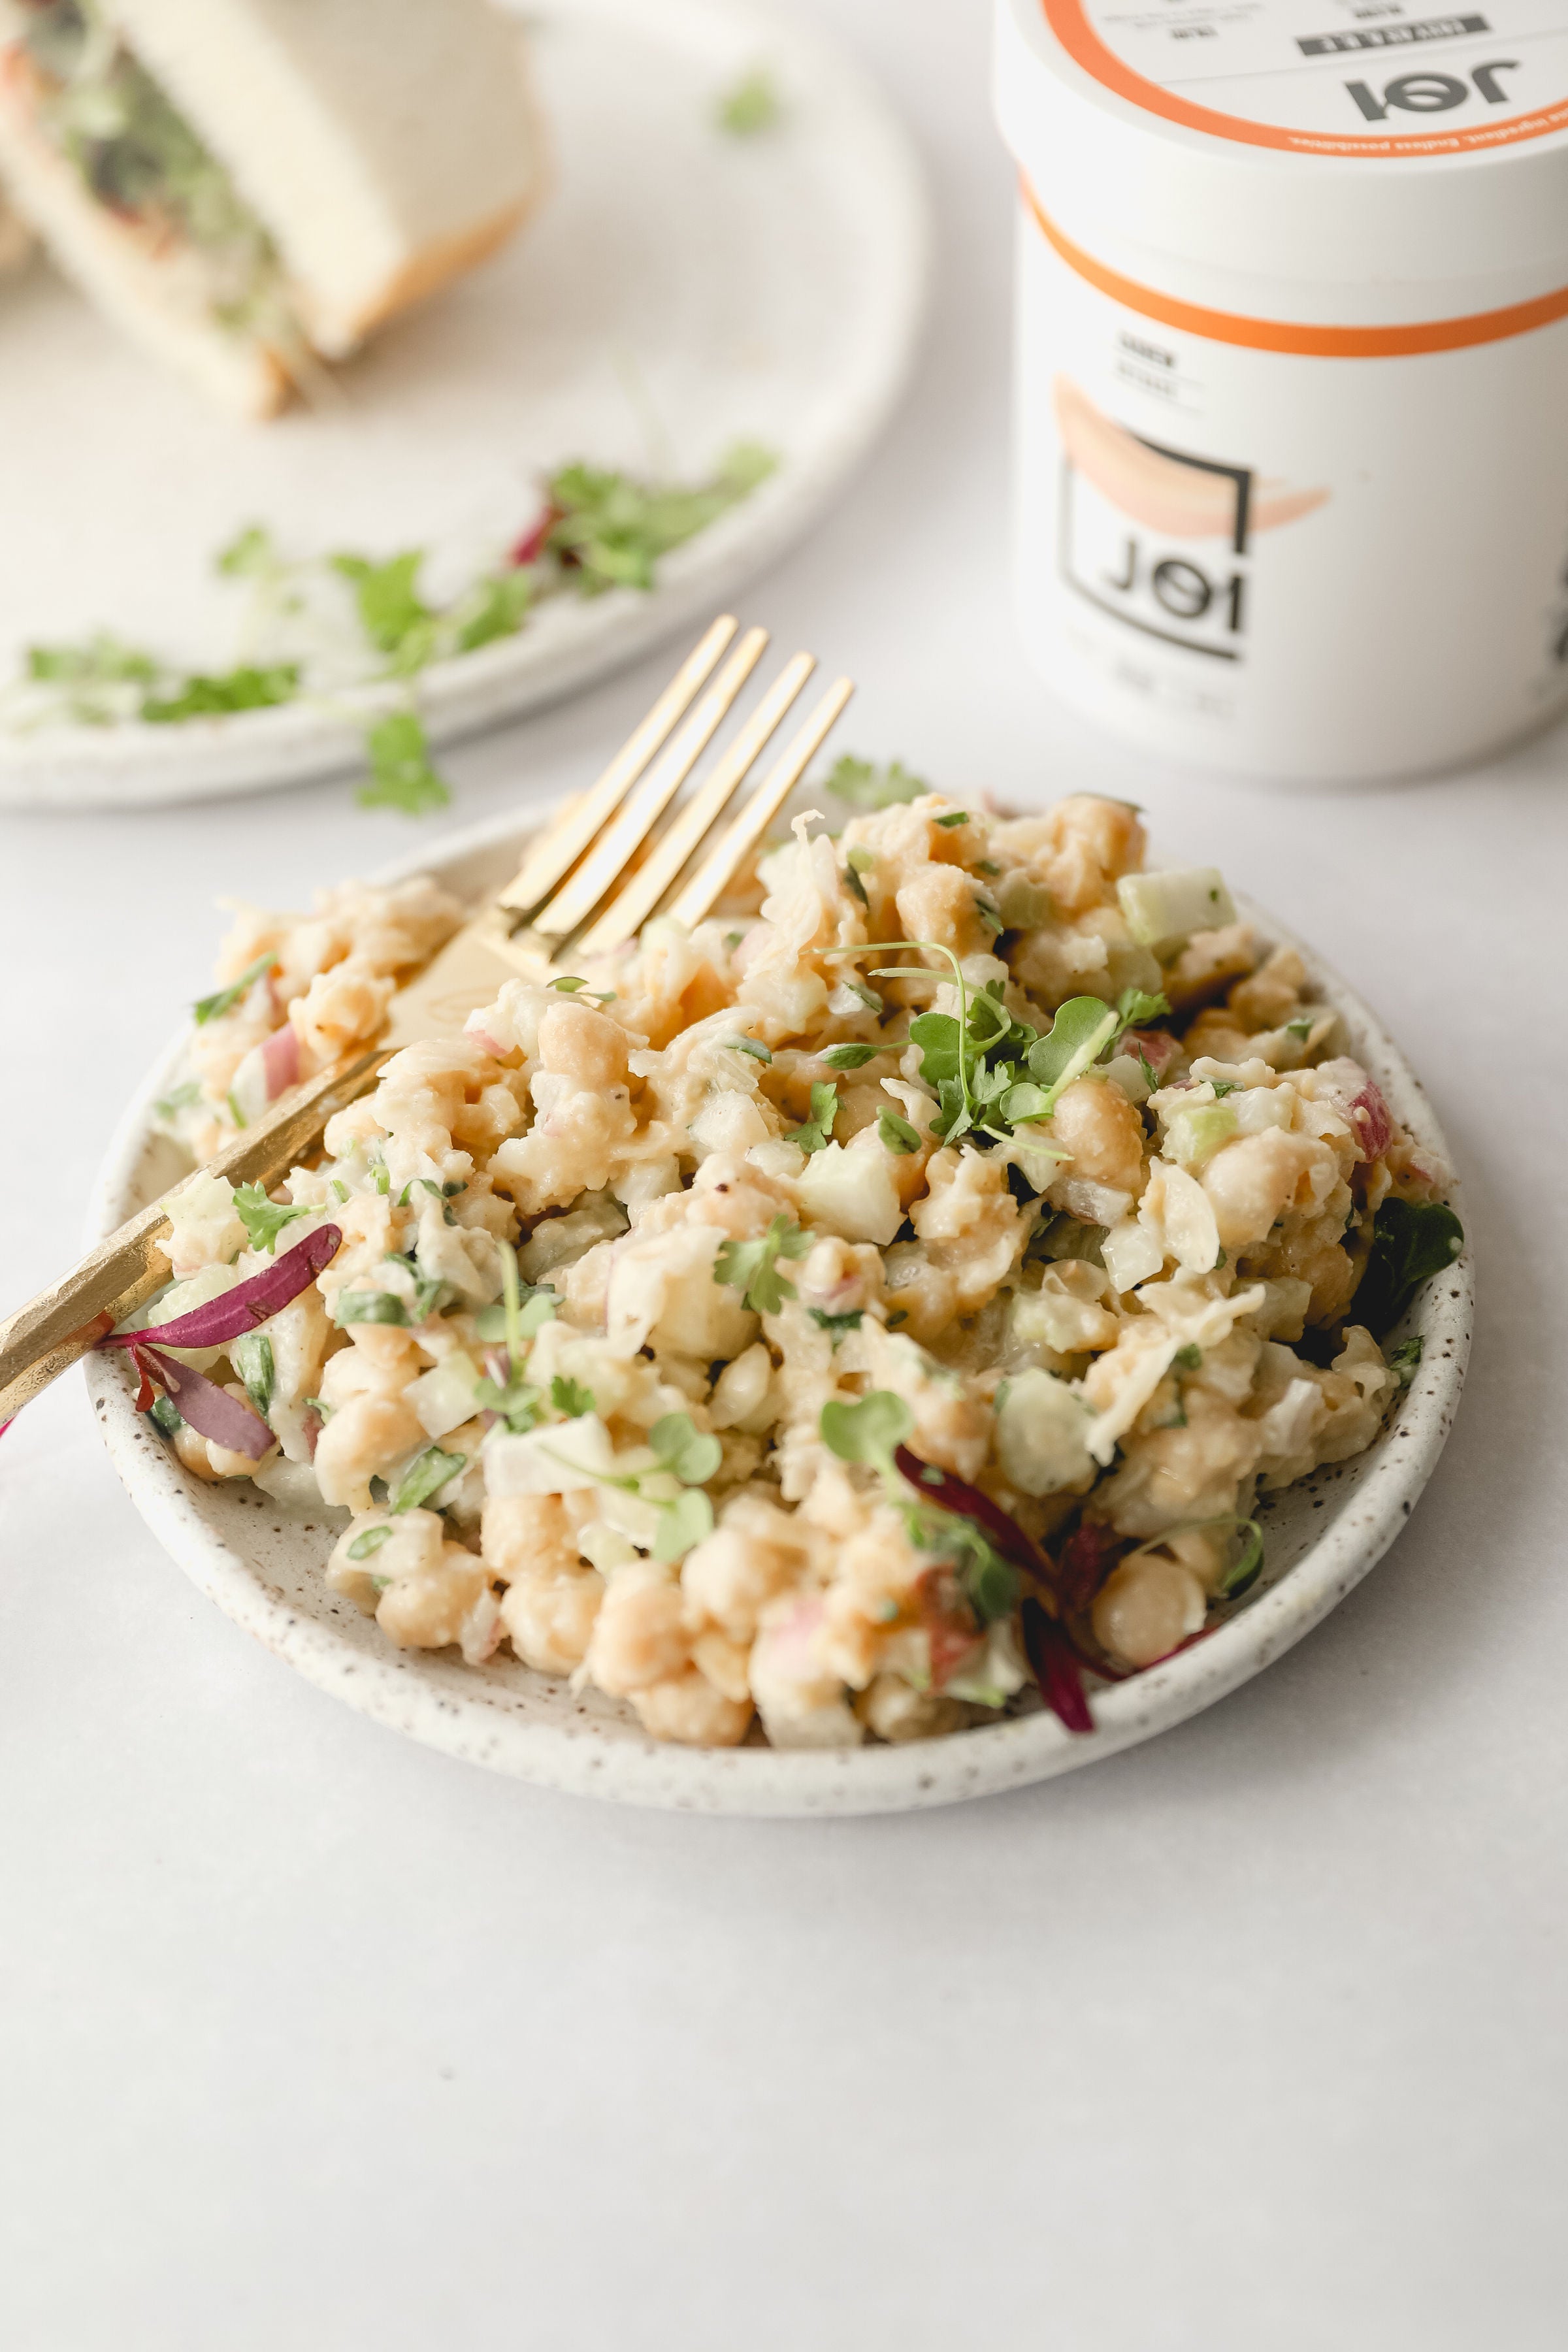 A Chickpea Salad For The Ages